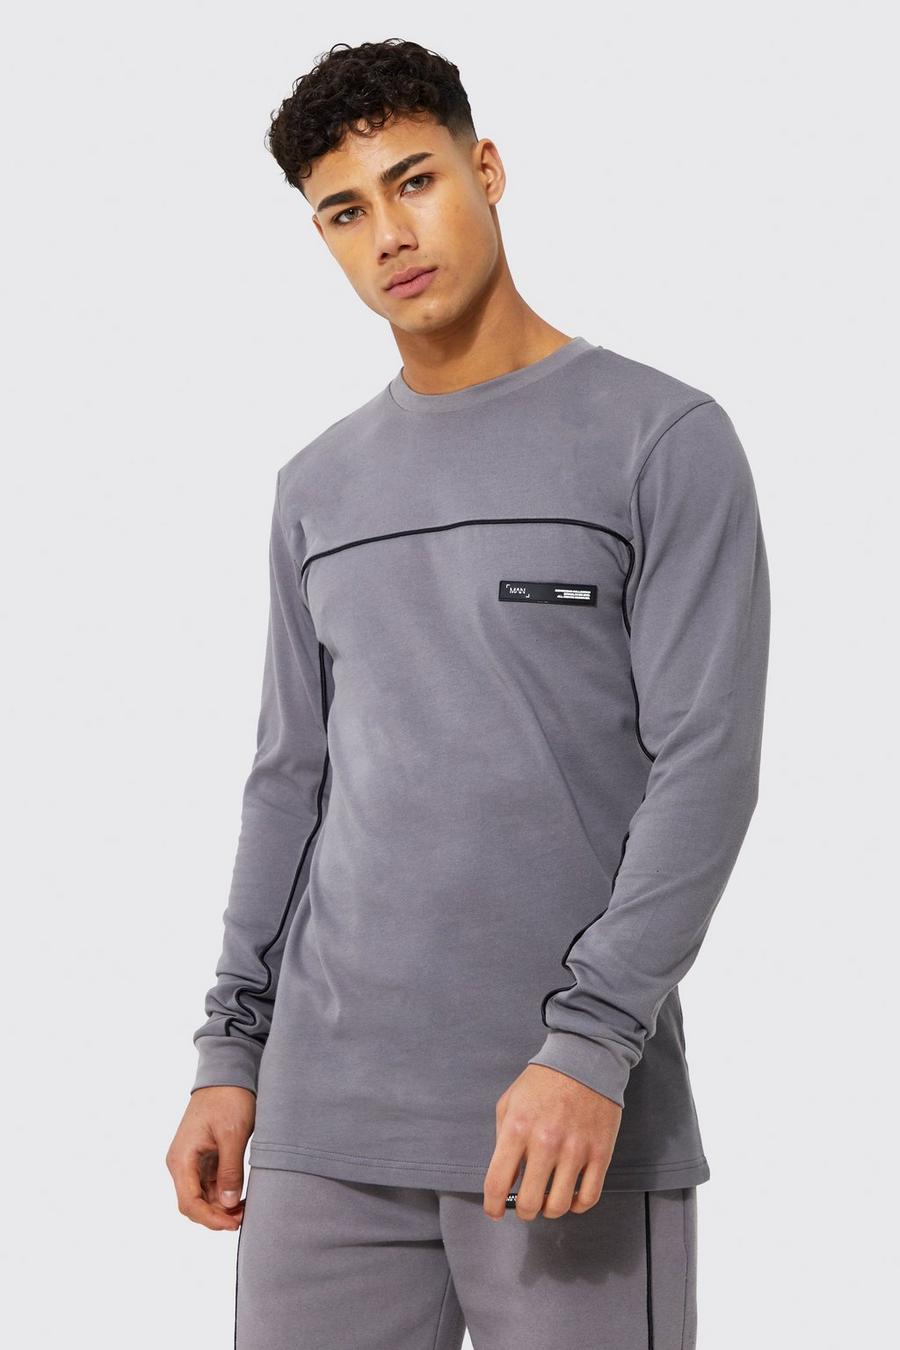 Charcoal gris Slim Fit Long Sleeve T-shirt Piping